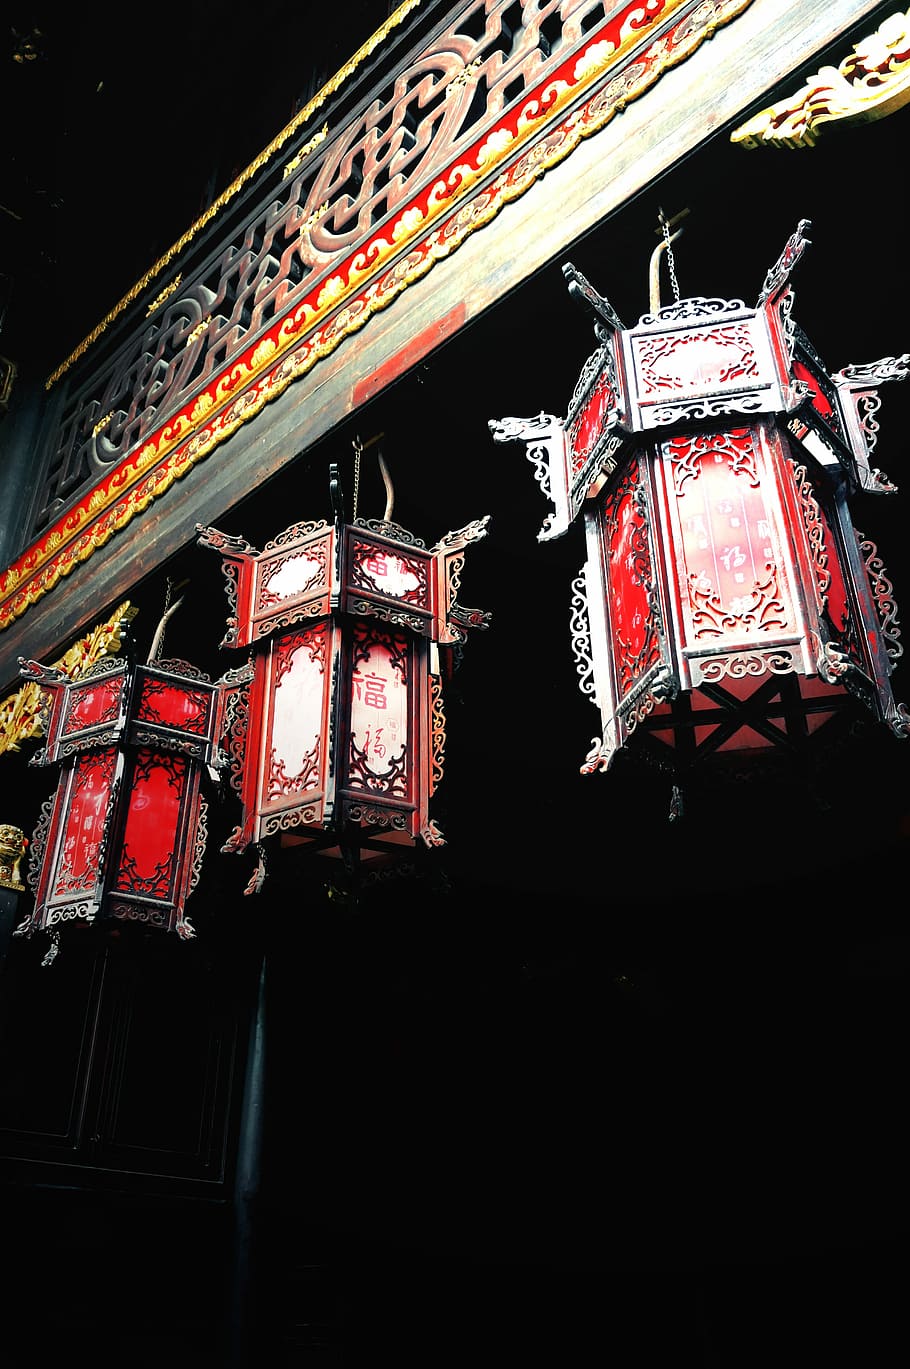 Festival, Festive, China, Red, Lantern, china red, lantern, chinese new year, new year's day, low angle view, night